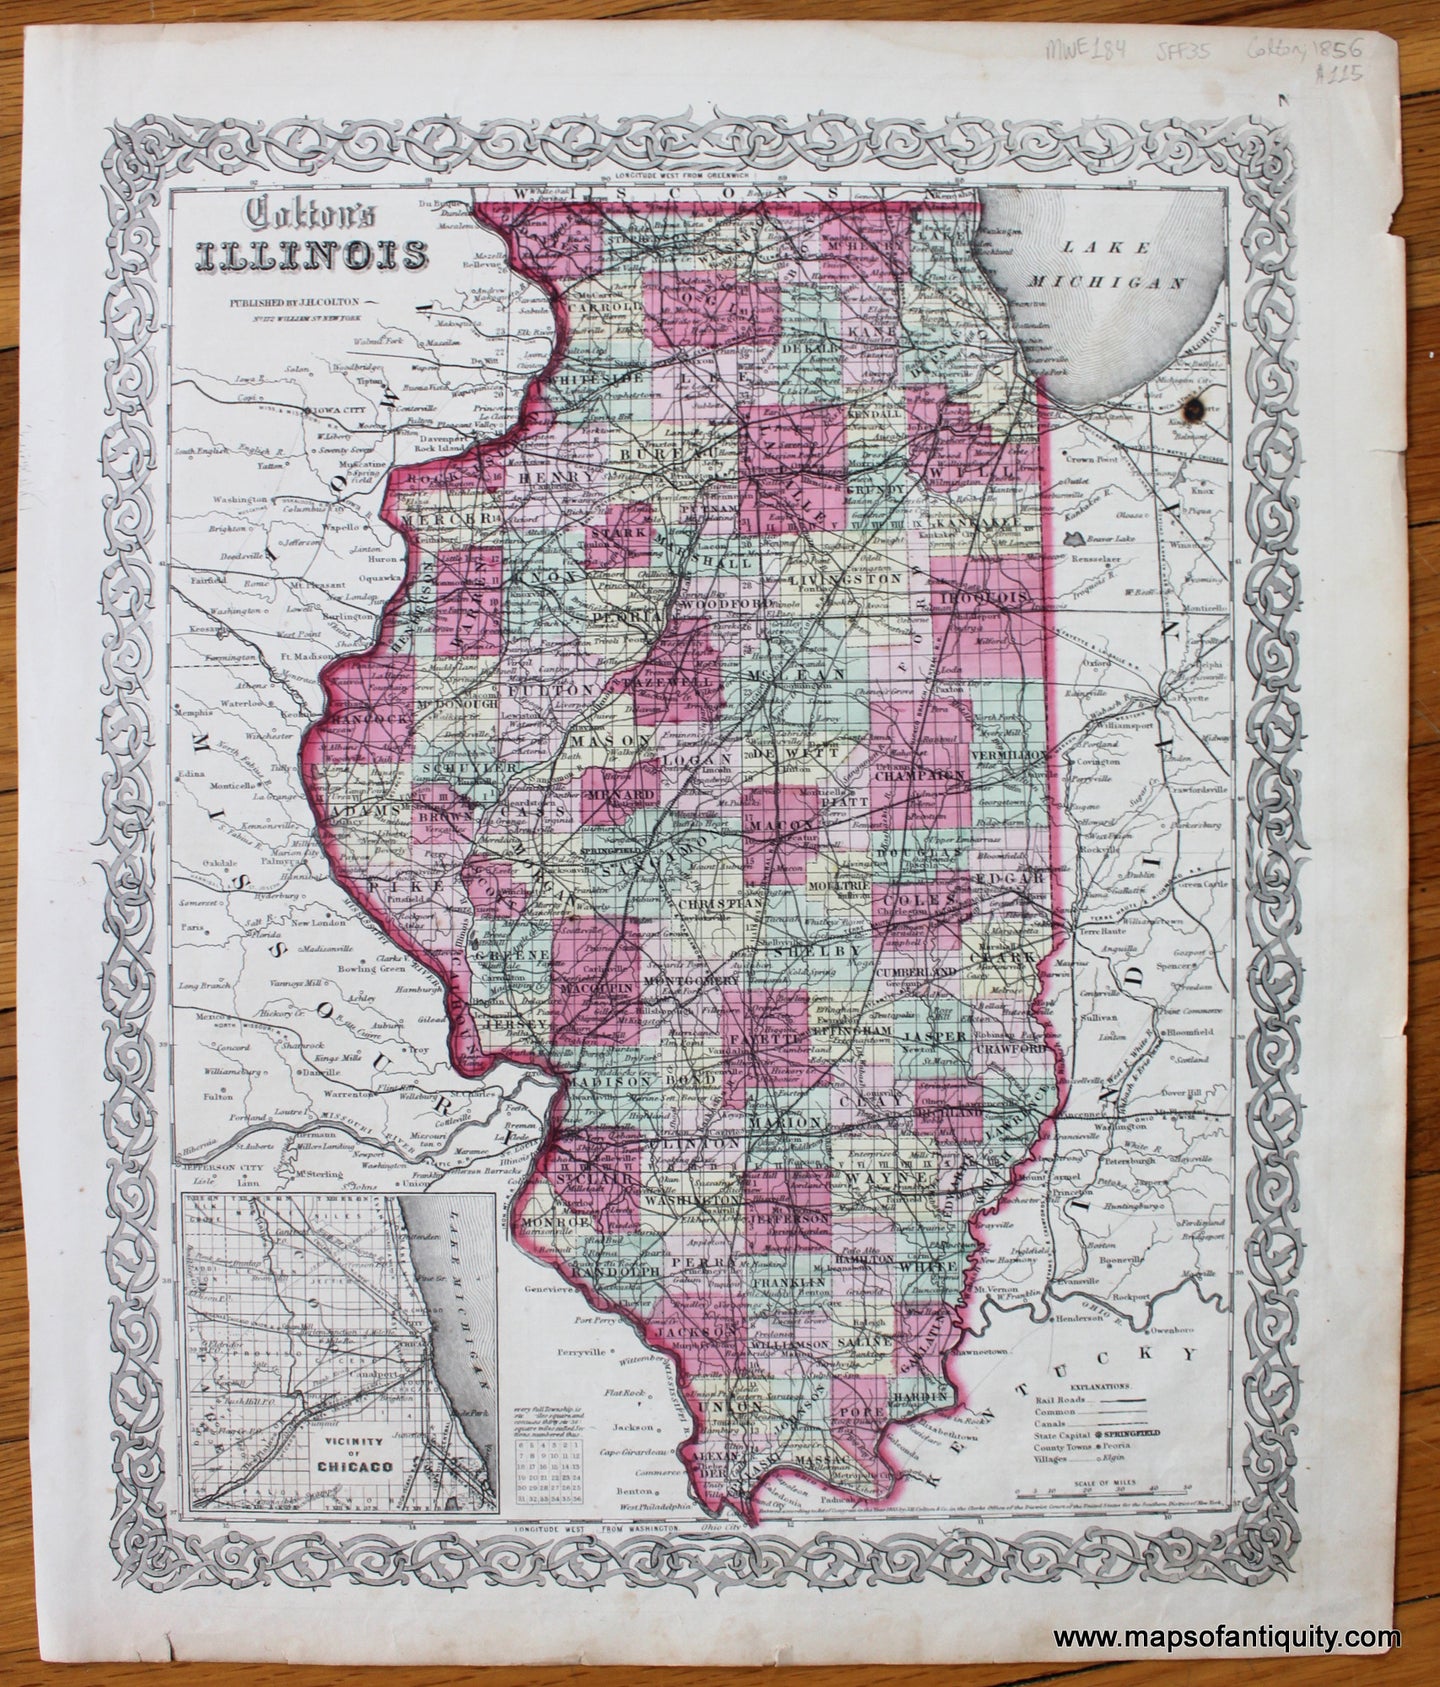 Antique-Hand-Colored-Map-Colton's-Illinois--United-States-Illinois-1856-Colton-Maps-Of-Antiquity